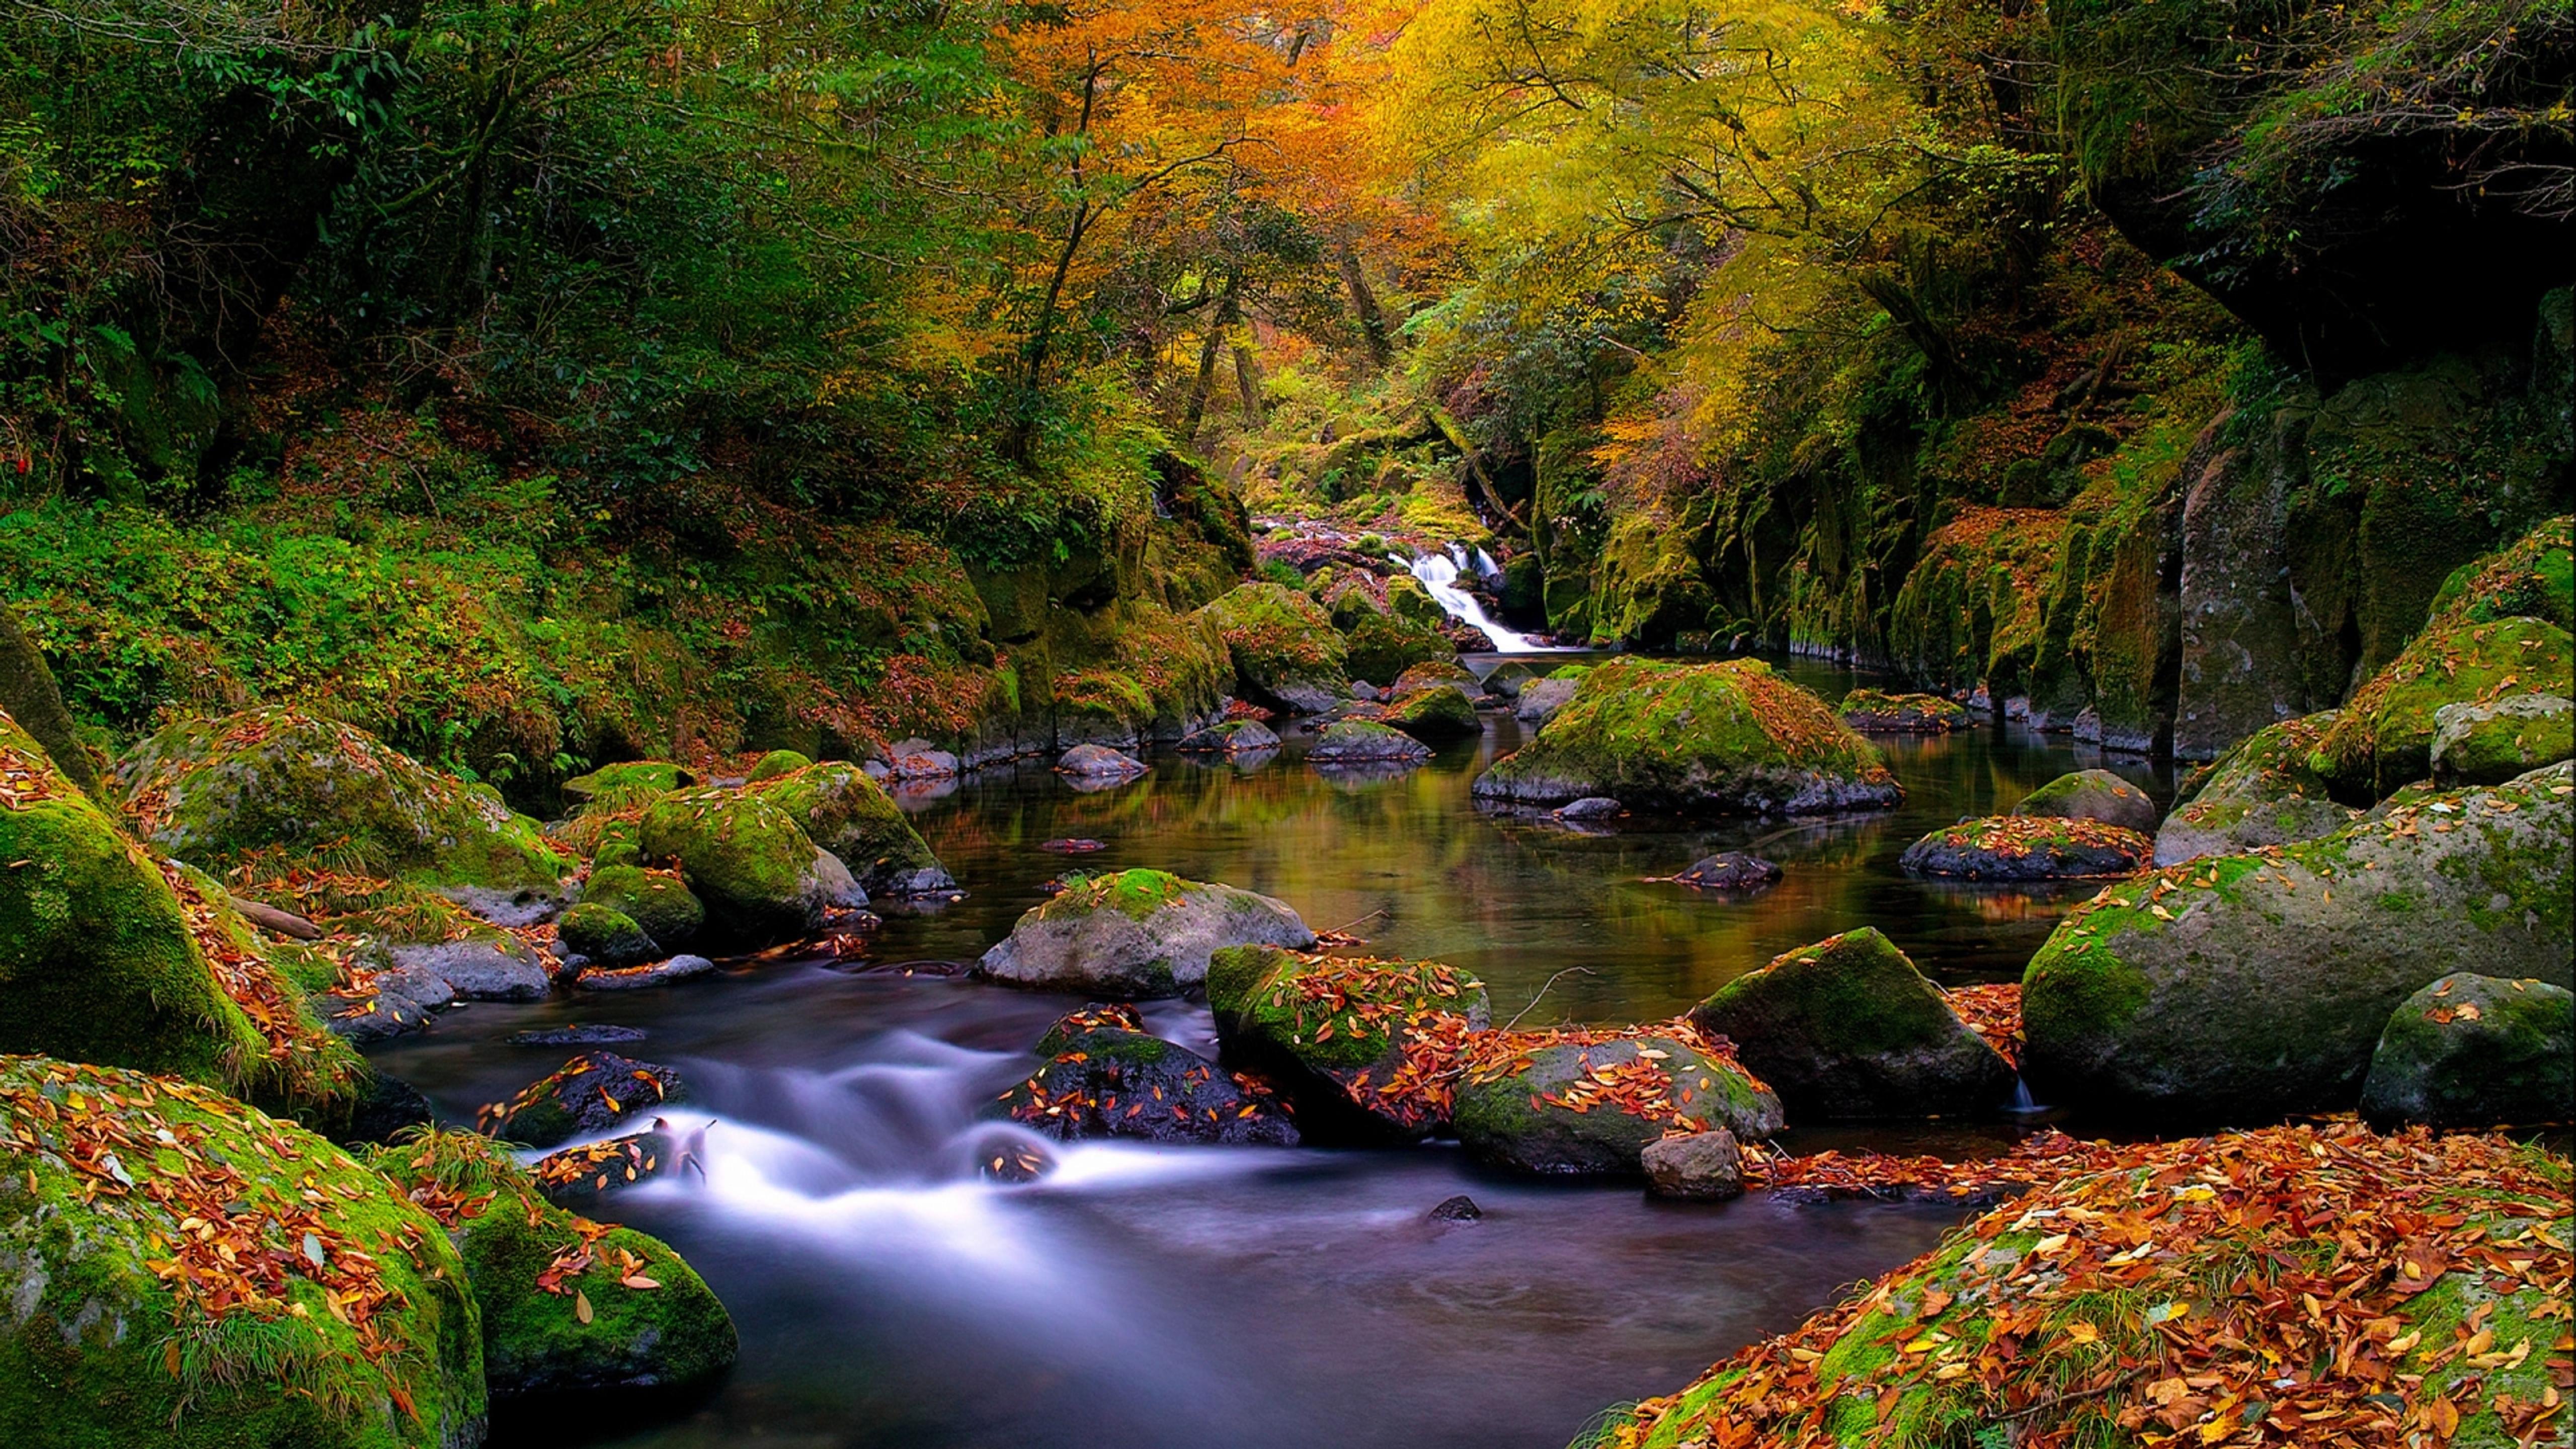 A beautiful autumn landscape in the forest Wallpaper Download 5120x2880